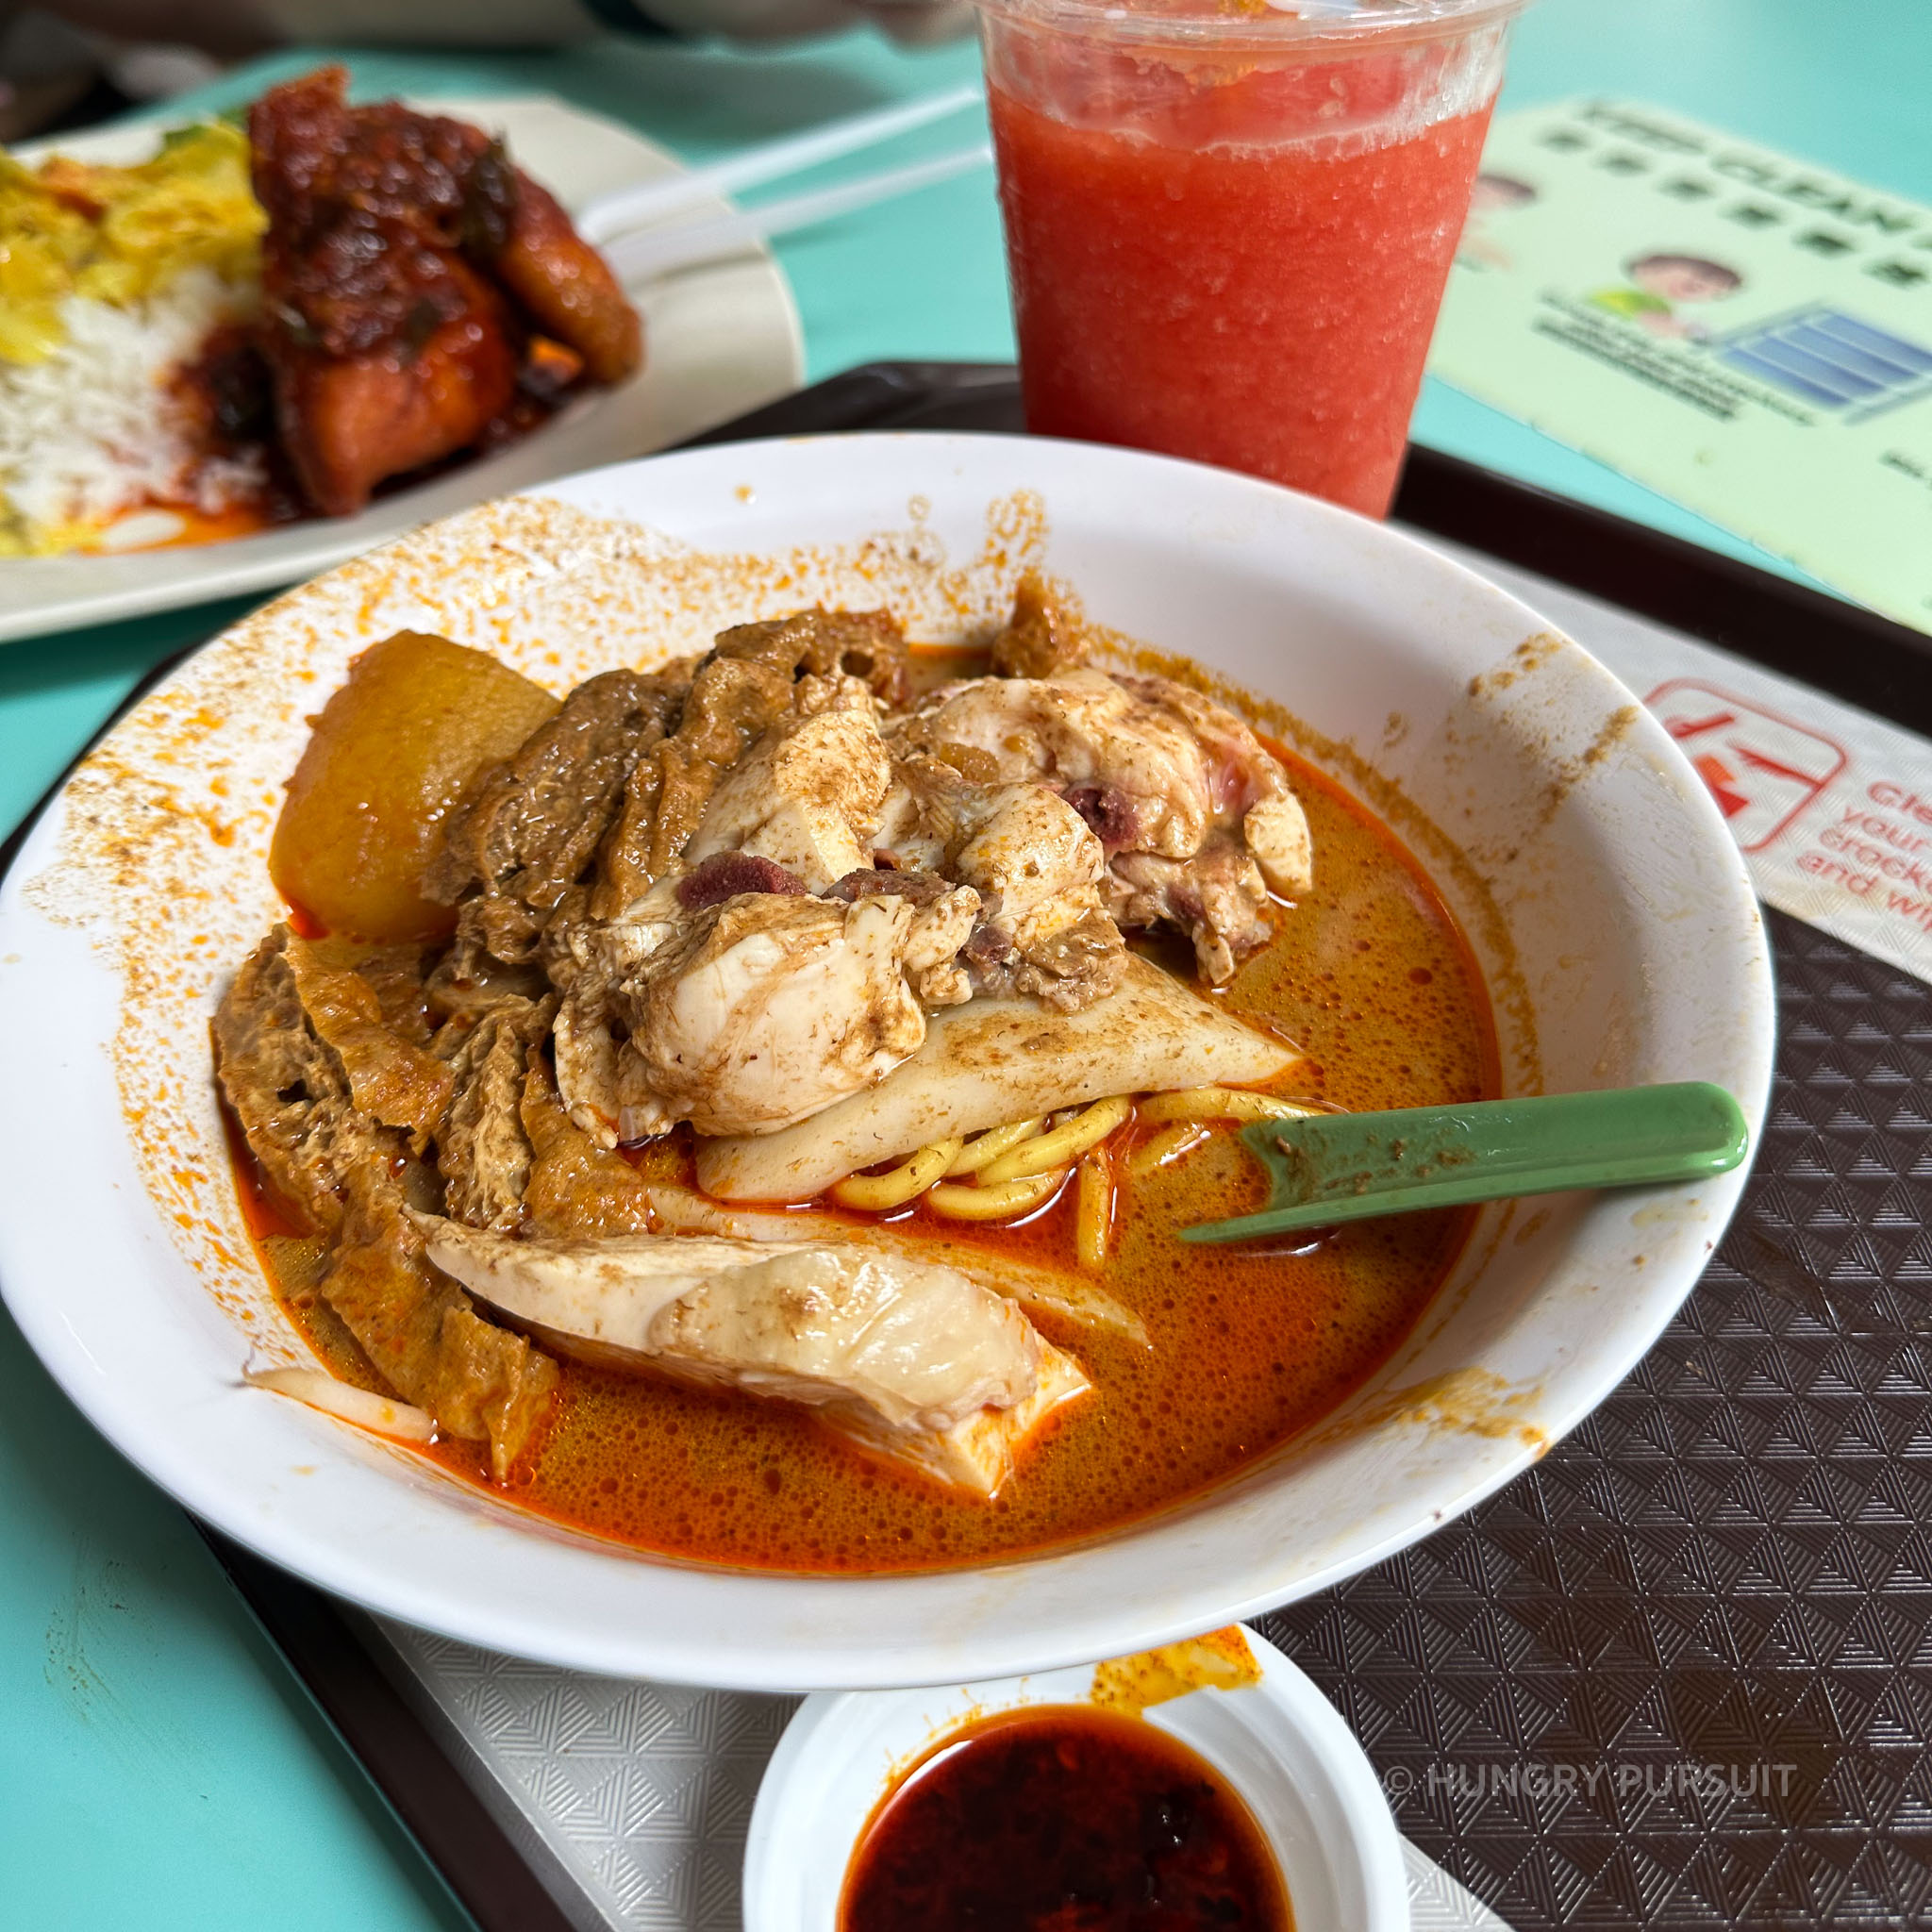 Heng Kee for its famous Chicken Curry Mee noodles Hong Lim Market